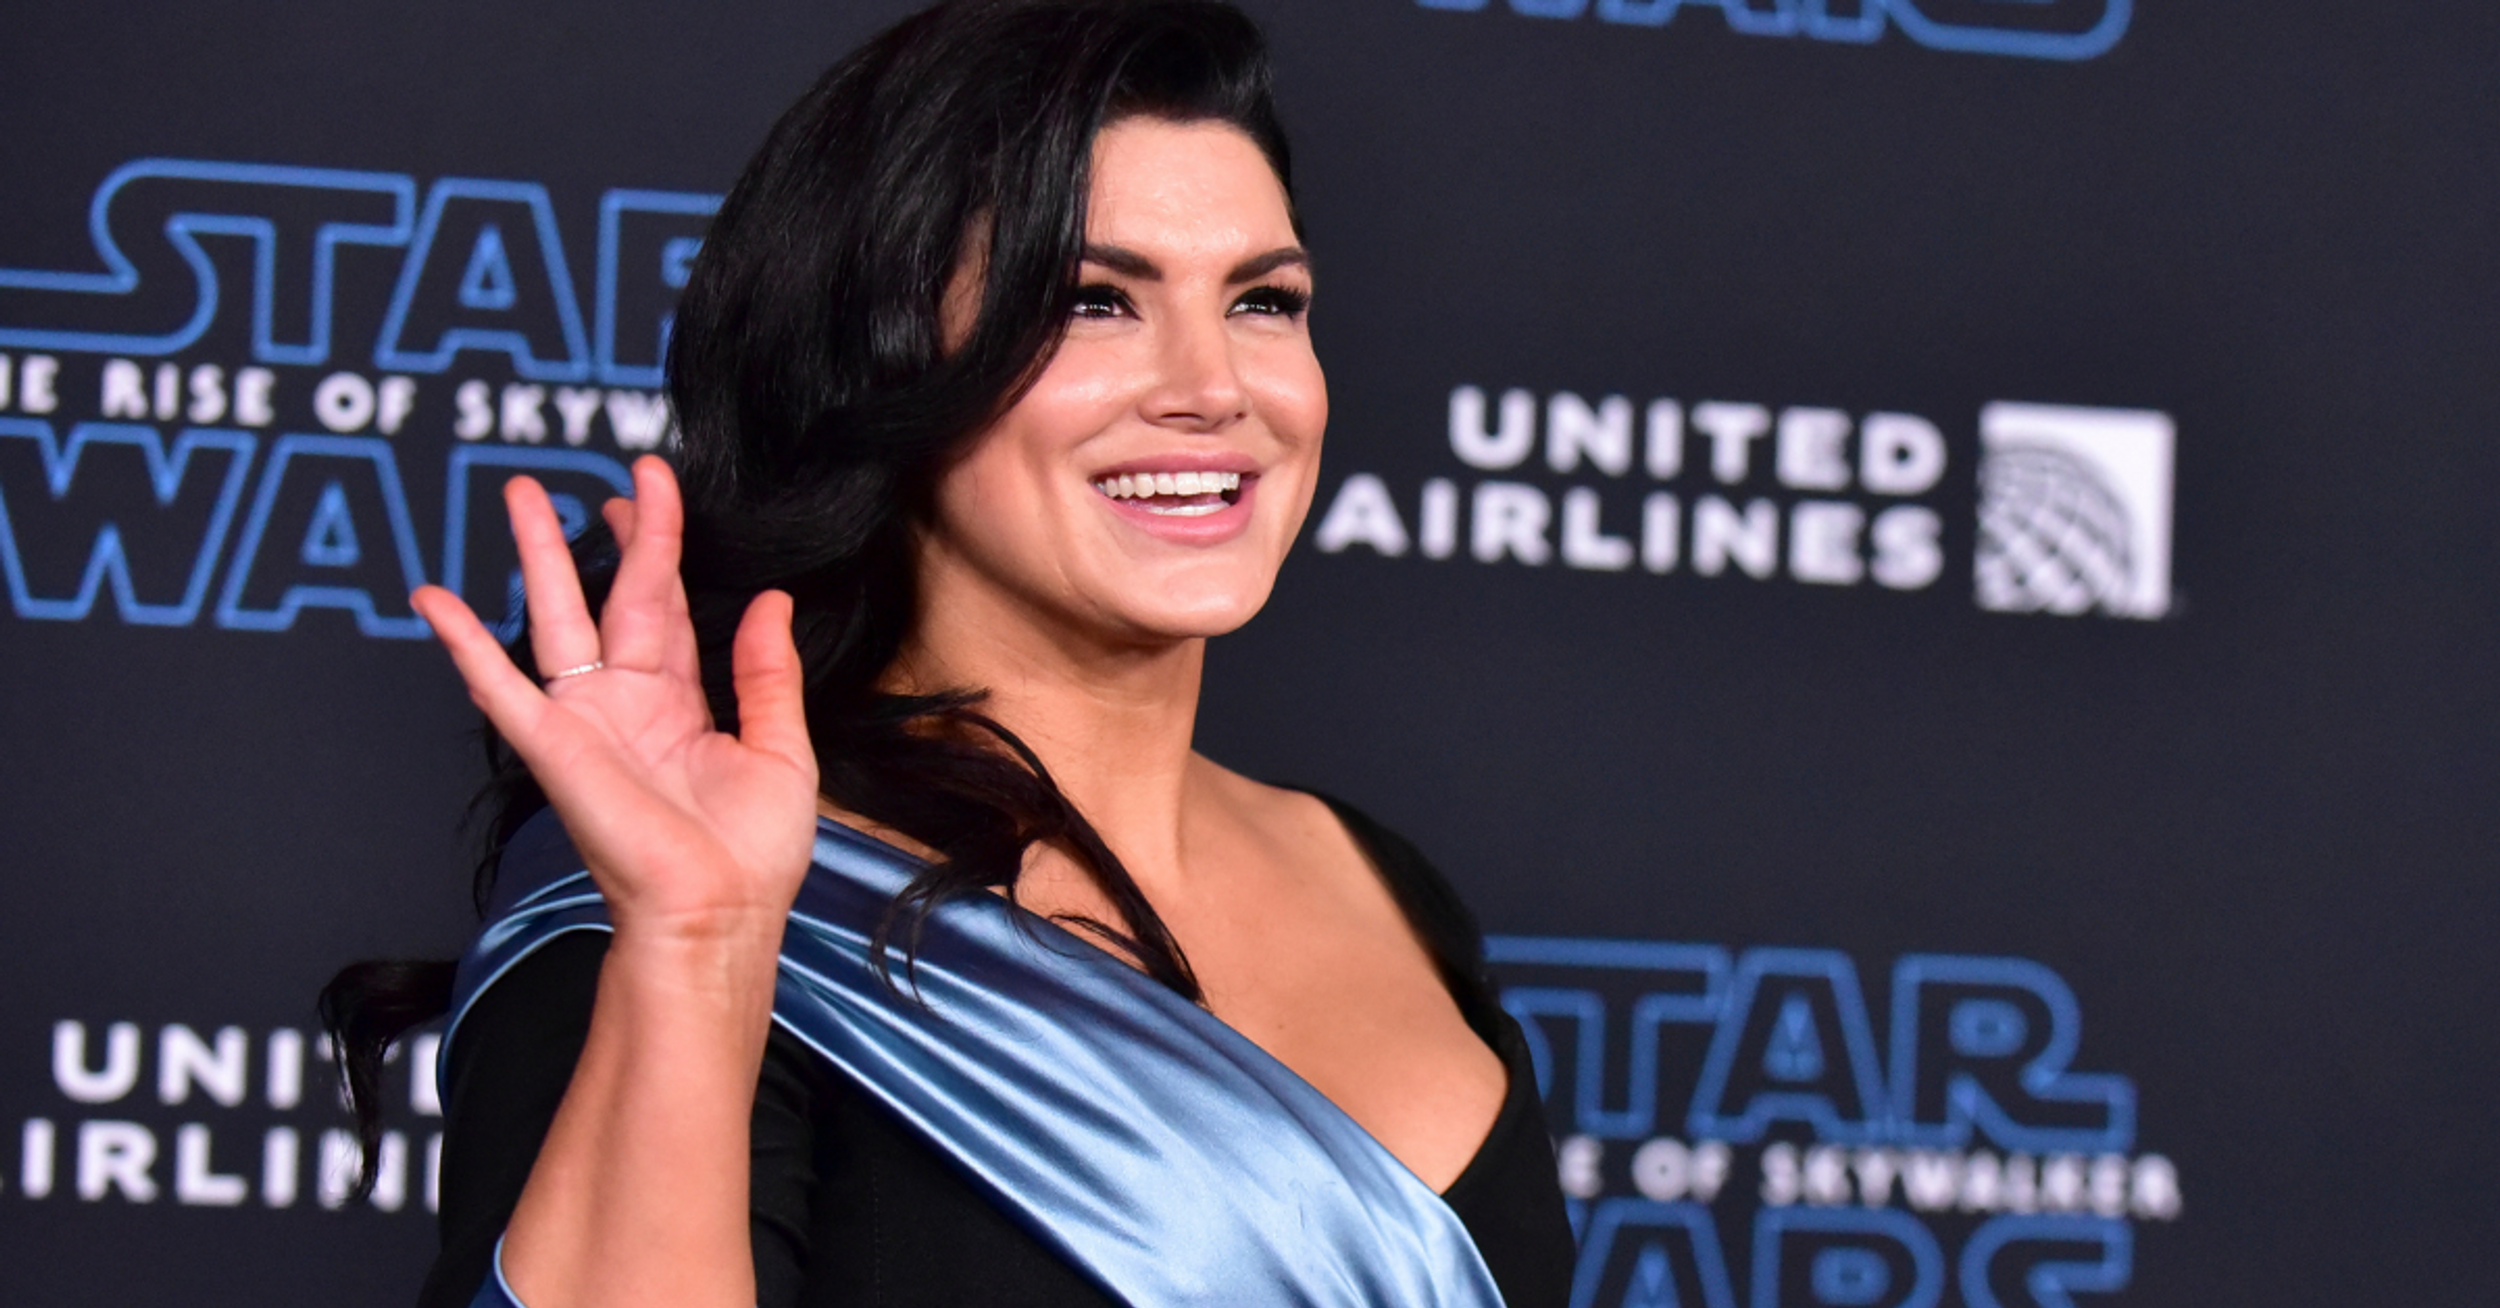 Fired 'Mandalorian' Star Gina Carano Is Now Accusing Disney And Lucasfilm Of 'Bullying' Her